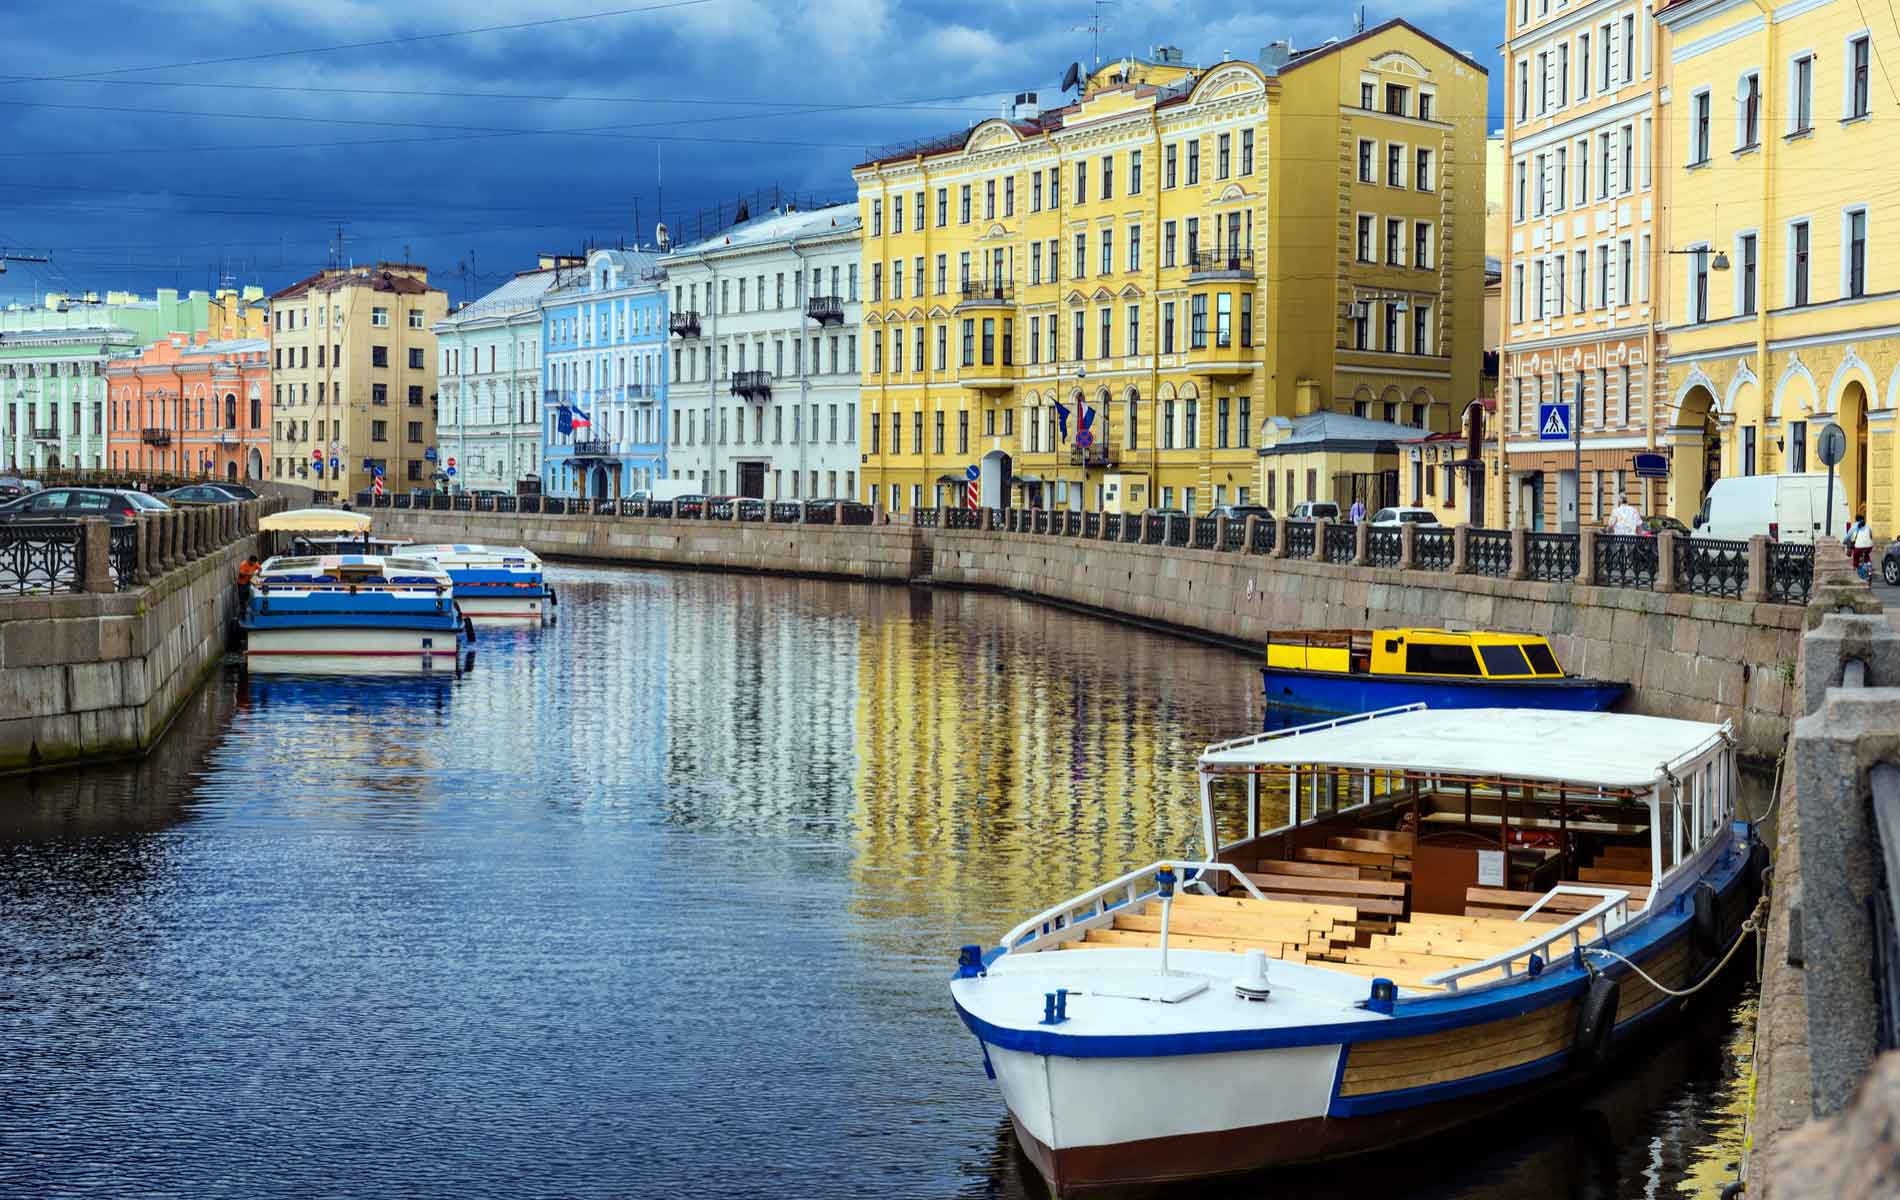 A canal in St. Petersburg, Russia